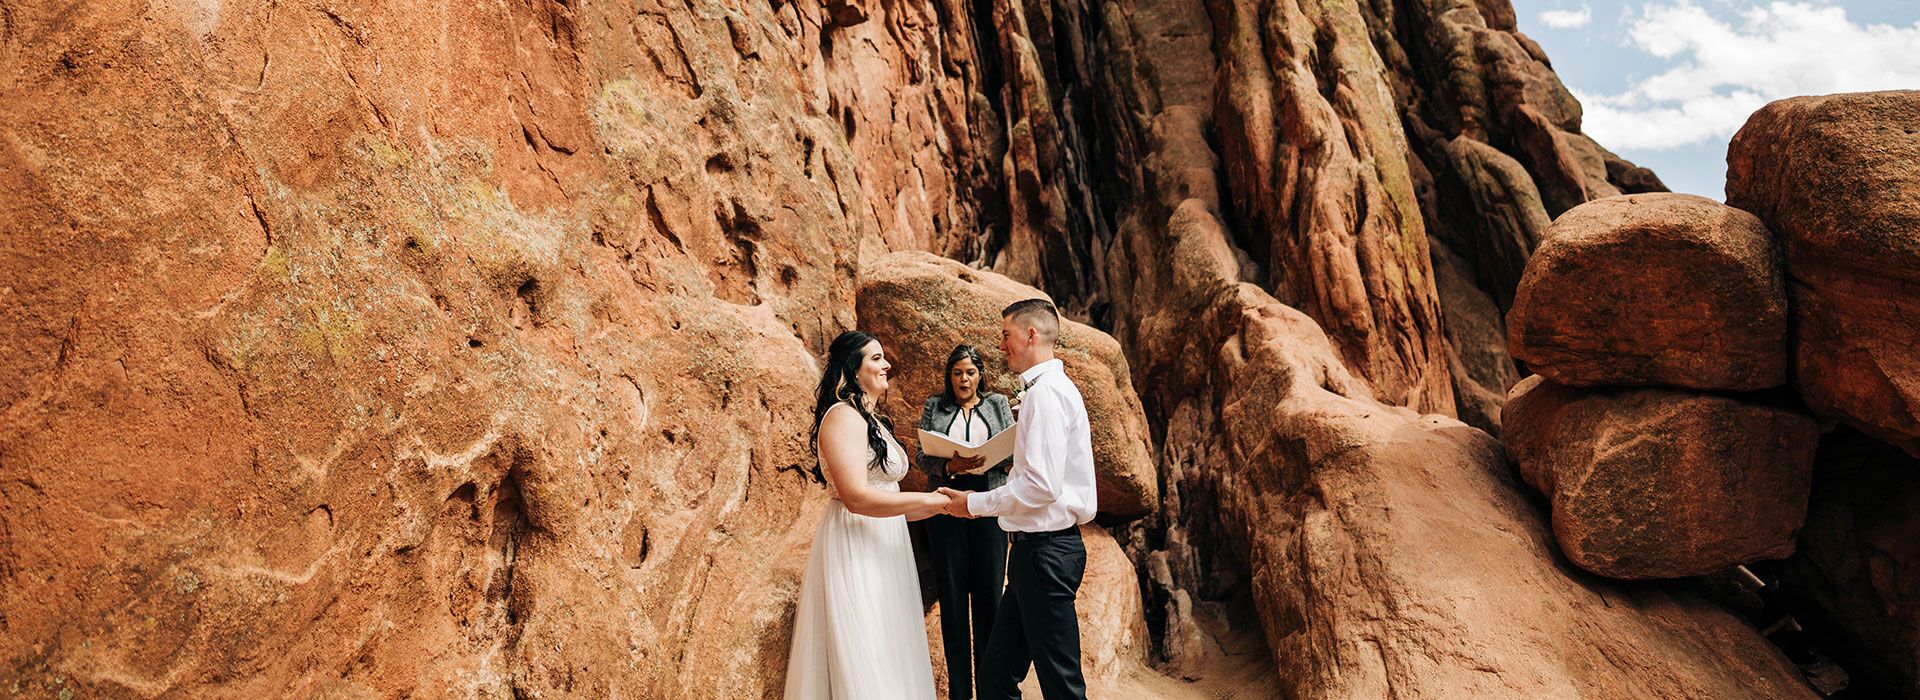 Places to elope in Colorado Springs